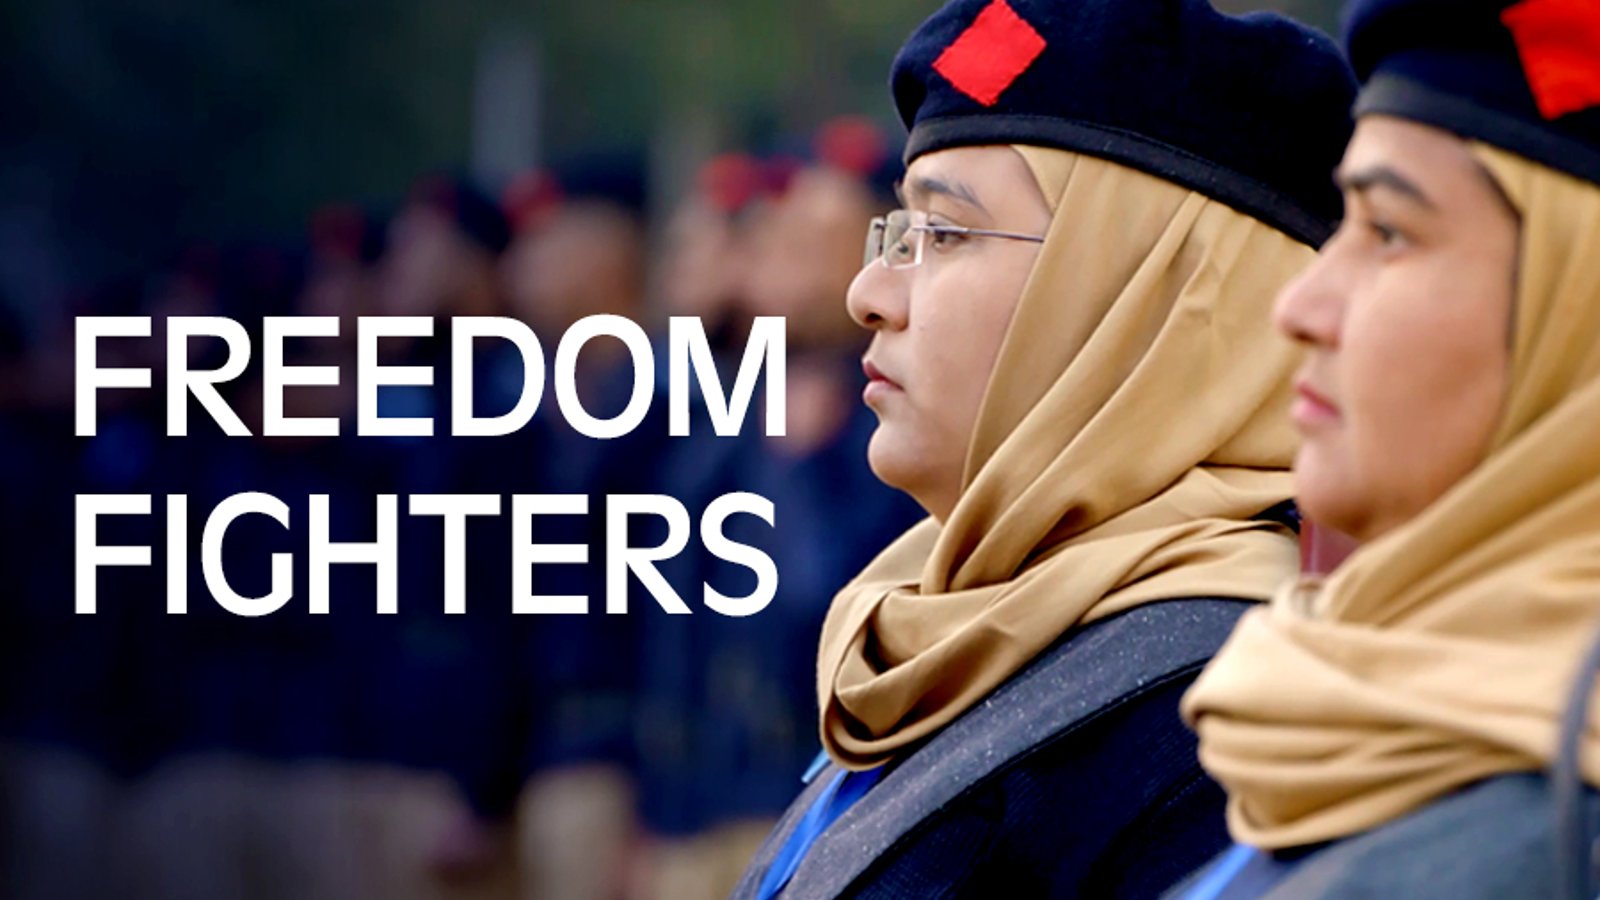 Freedom Fighters - Fighting for Equal Rights for Women in Pakistan